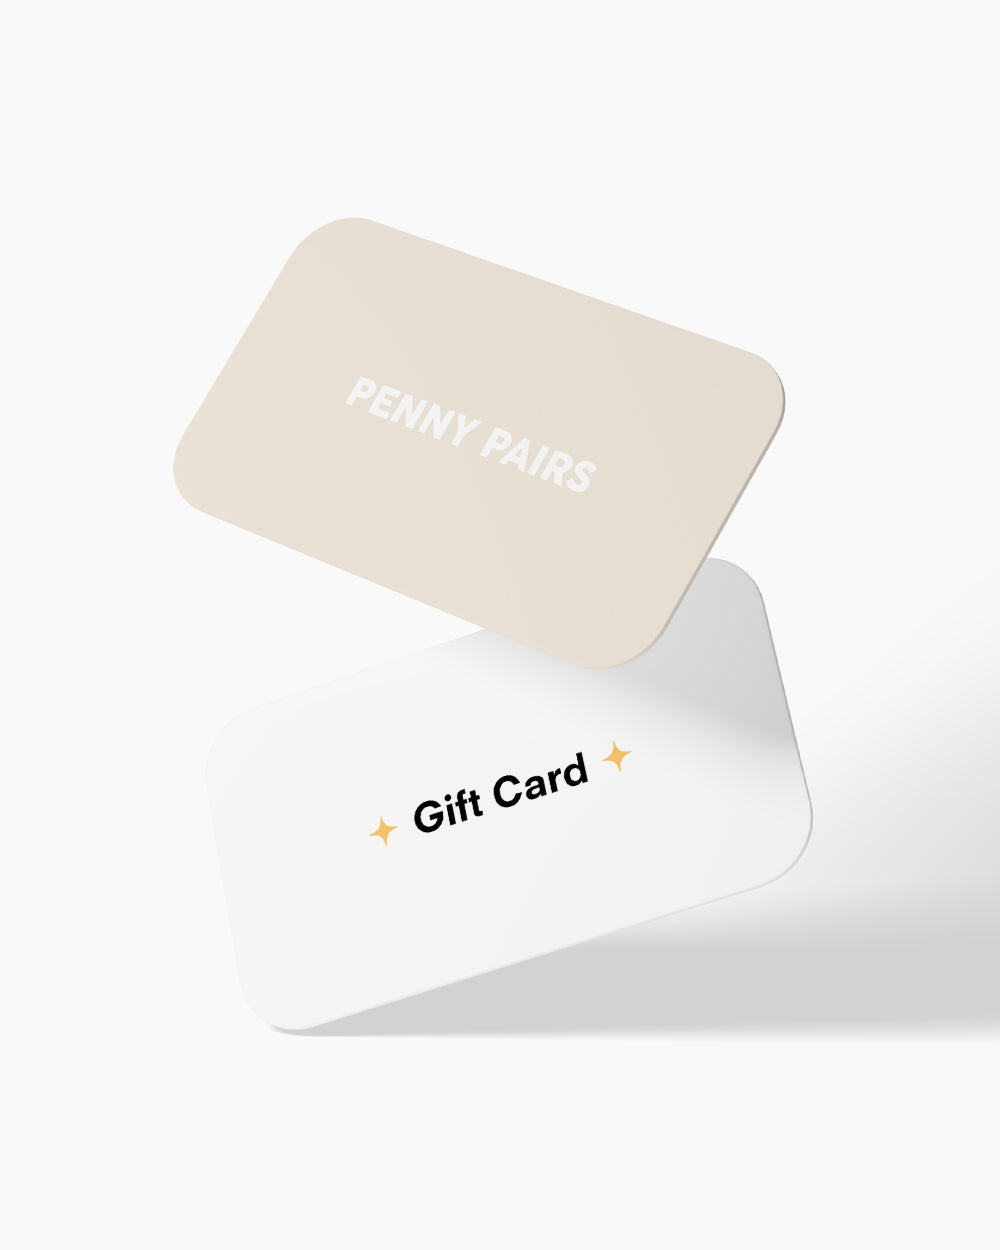 Penny Pairs Digital Gift Card